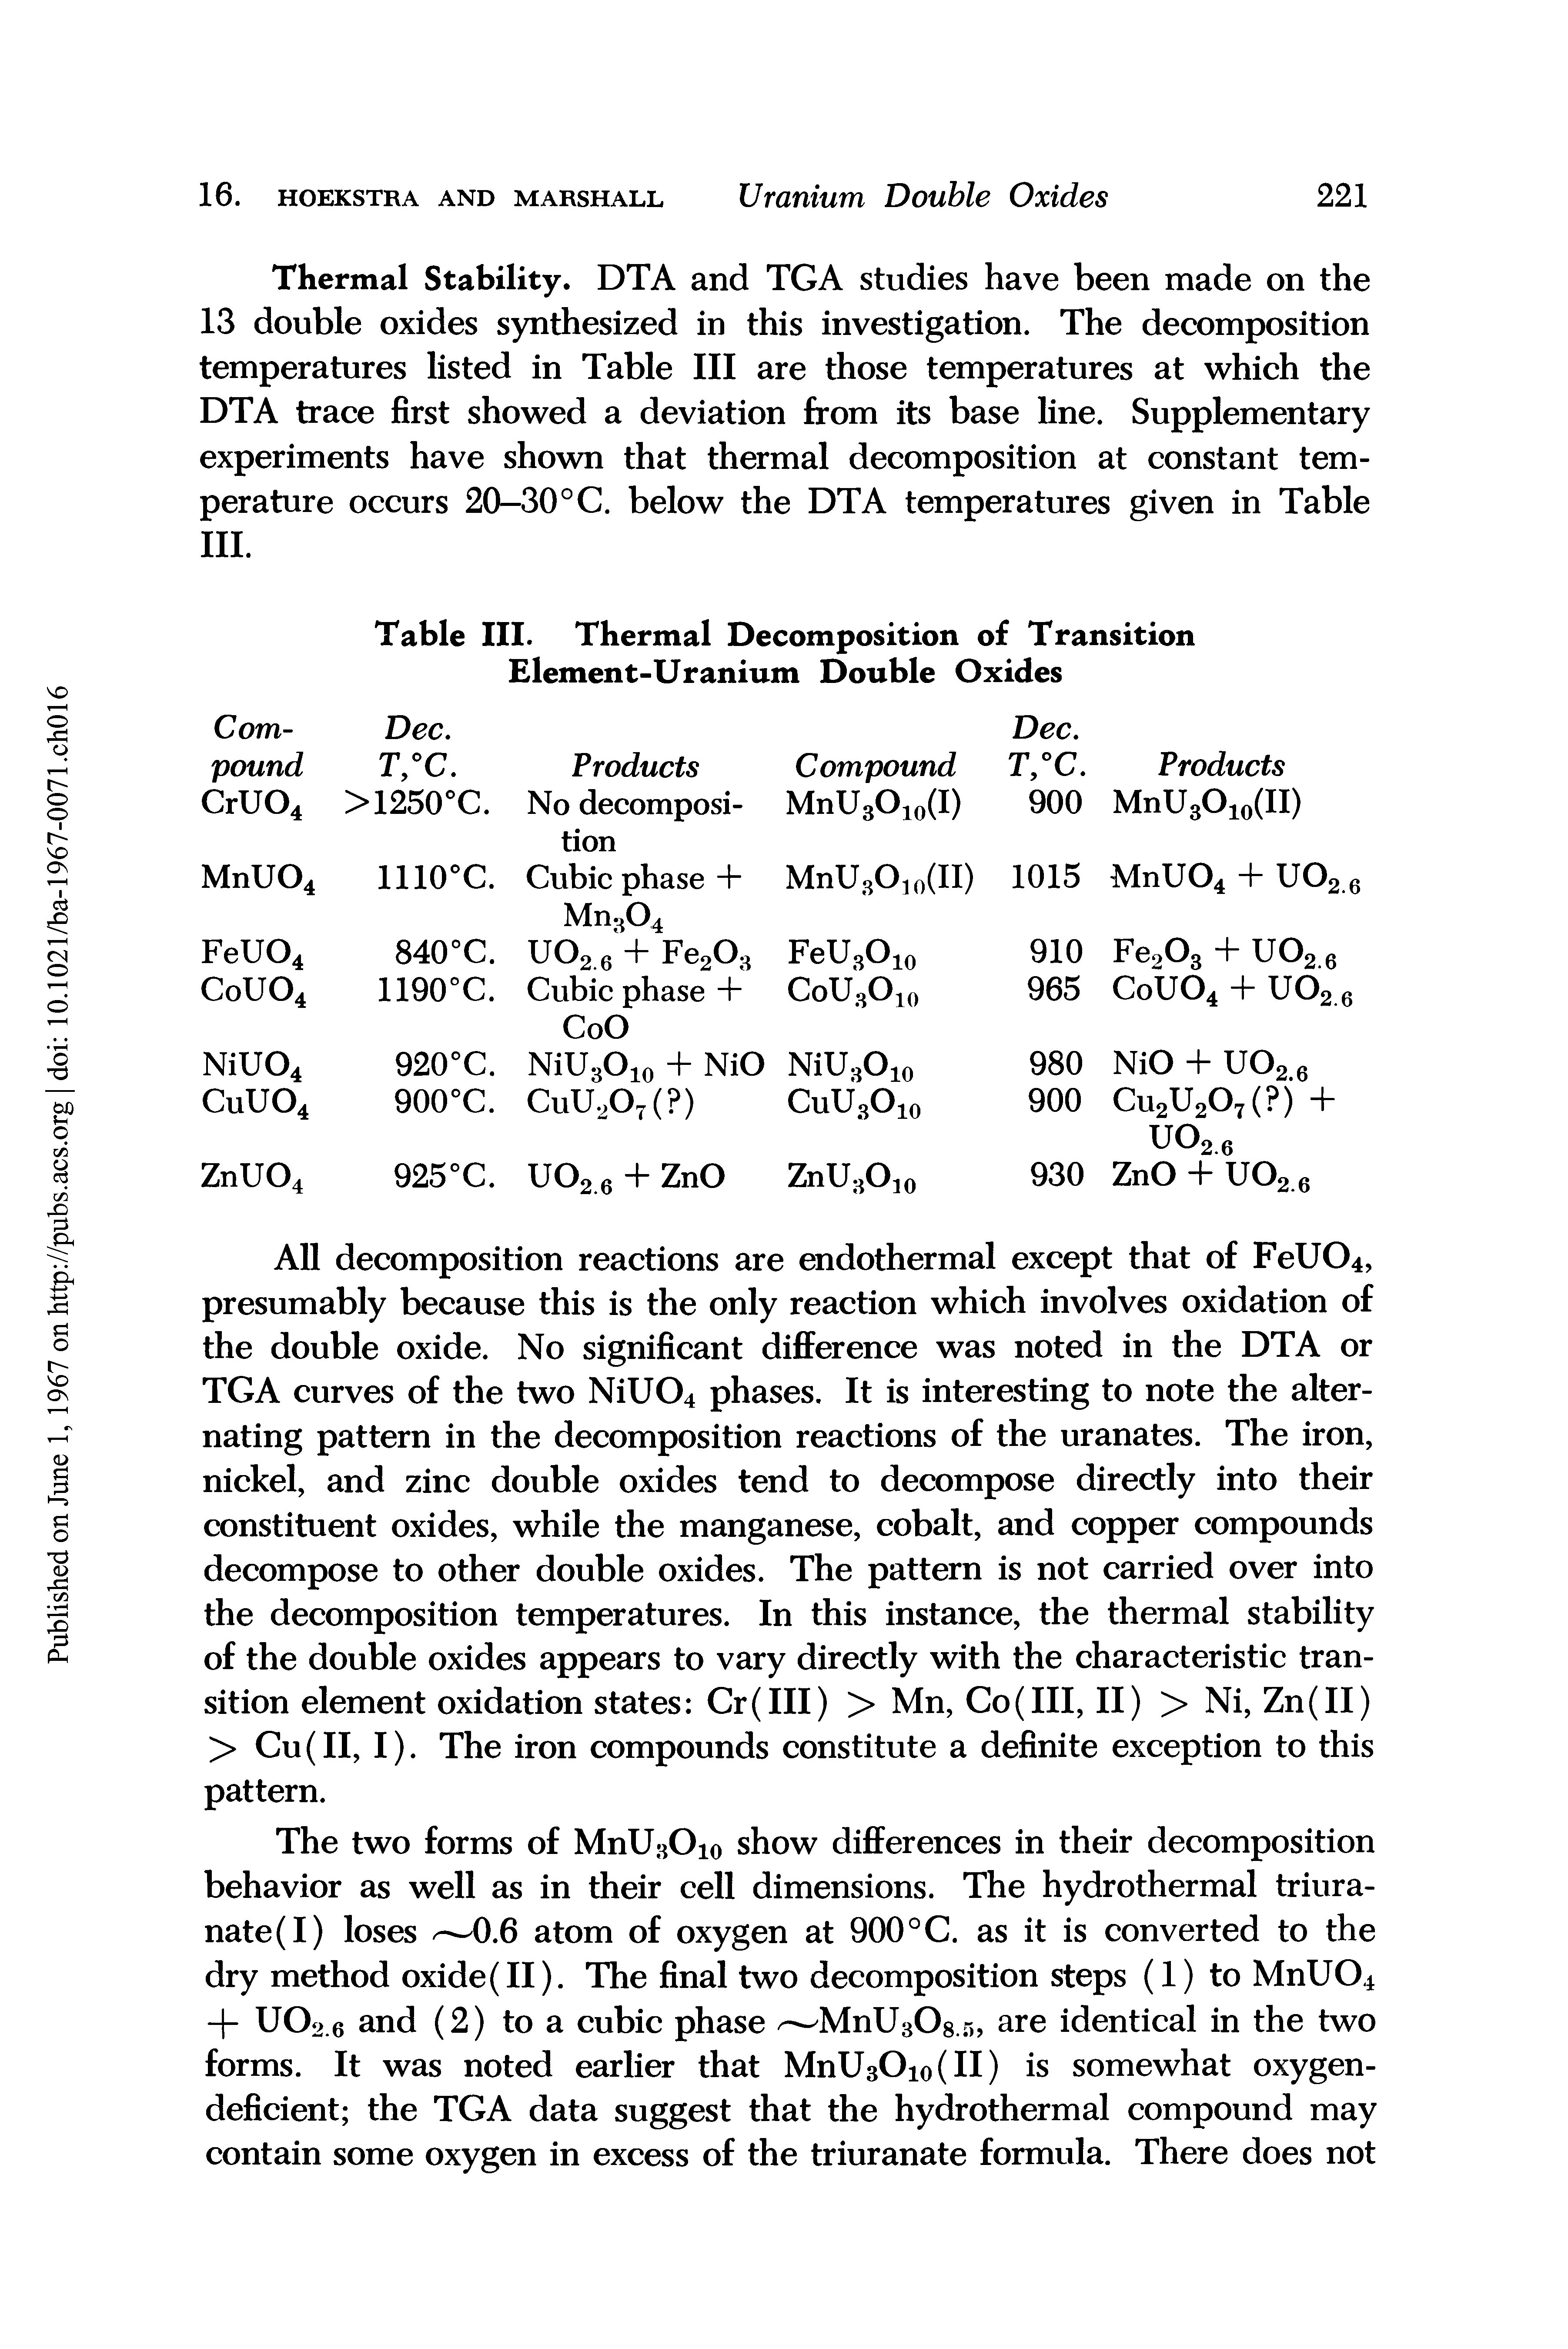 Table III. Thermal Decomposition of Transition Element-Uranium Double Oxides...